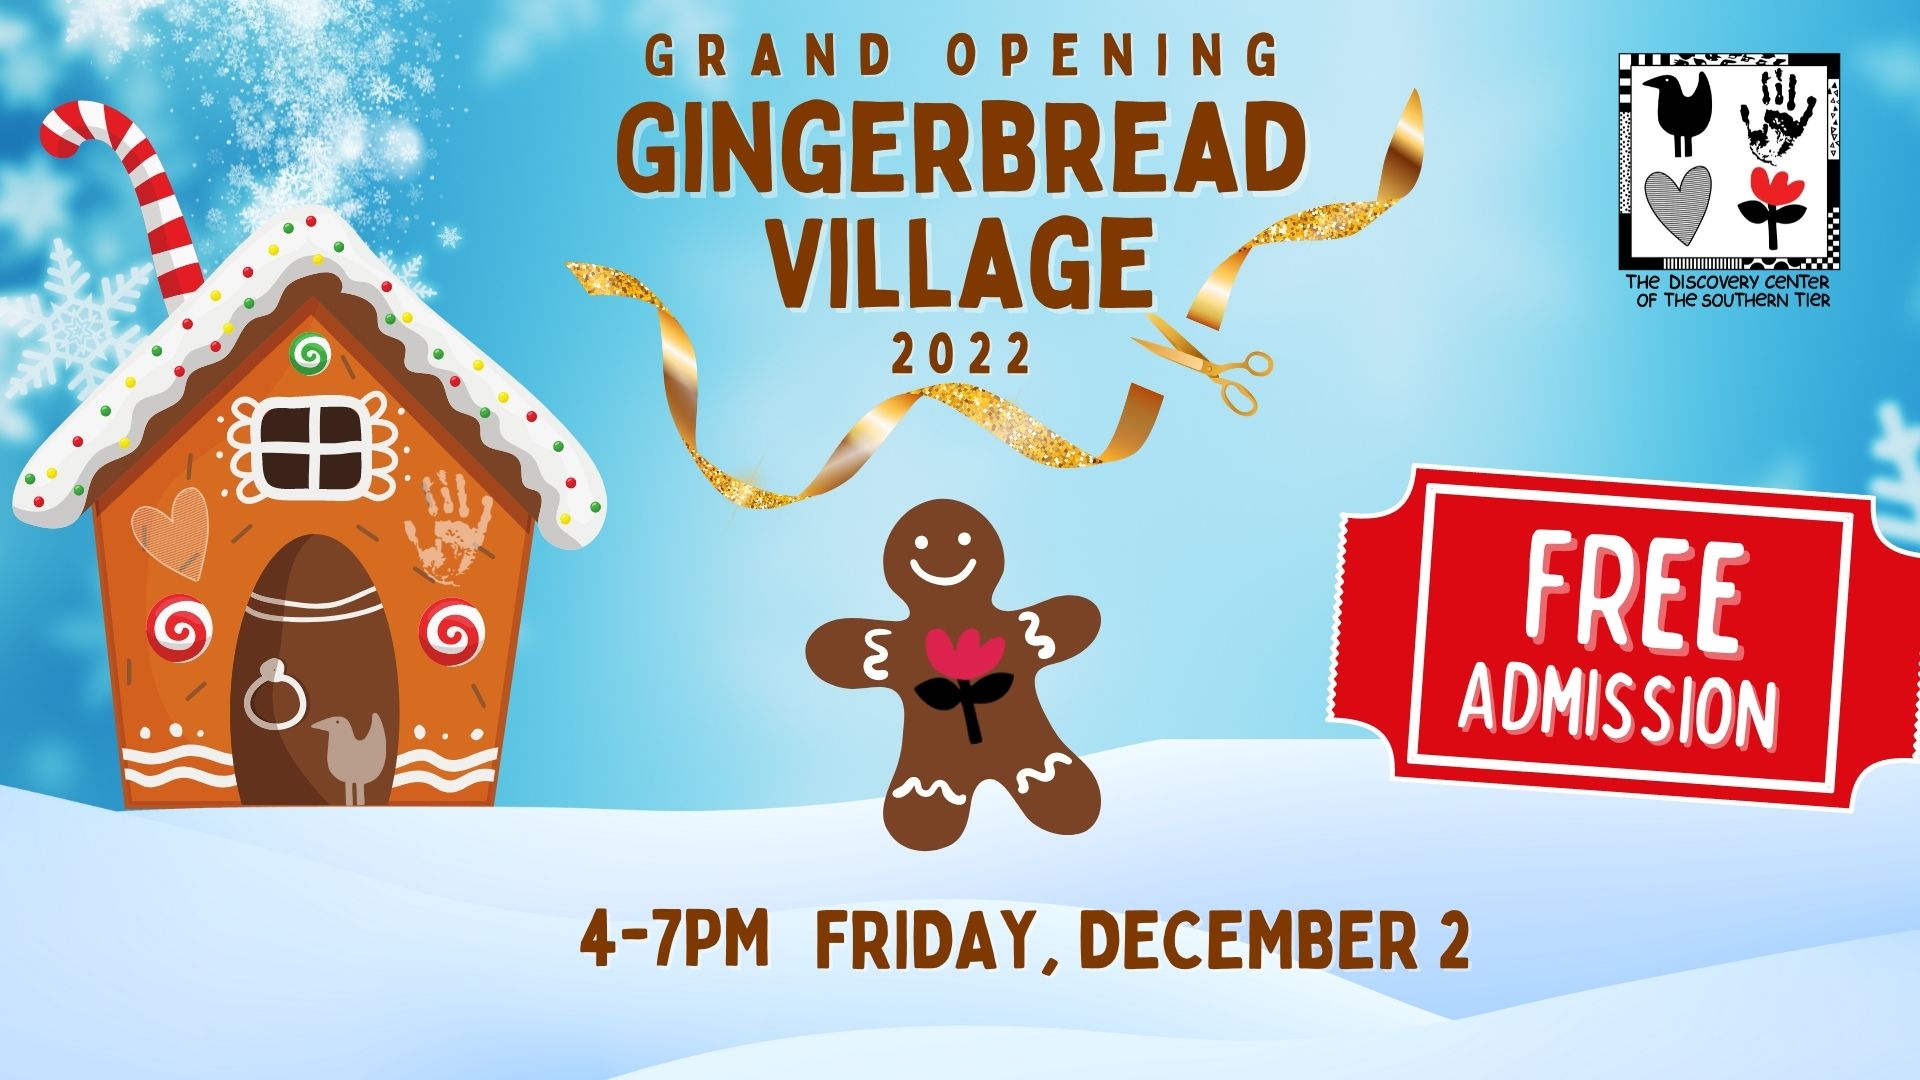 Gingerbread Village Grand Opening